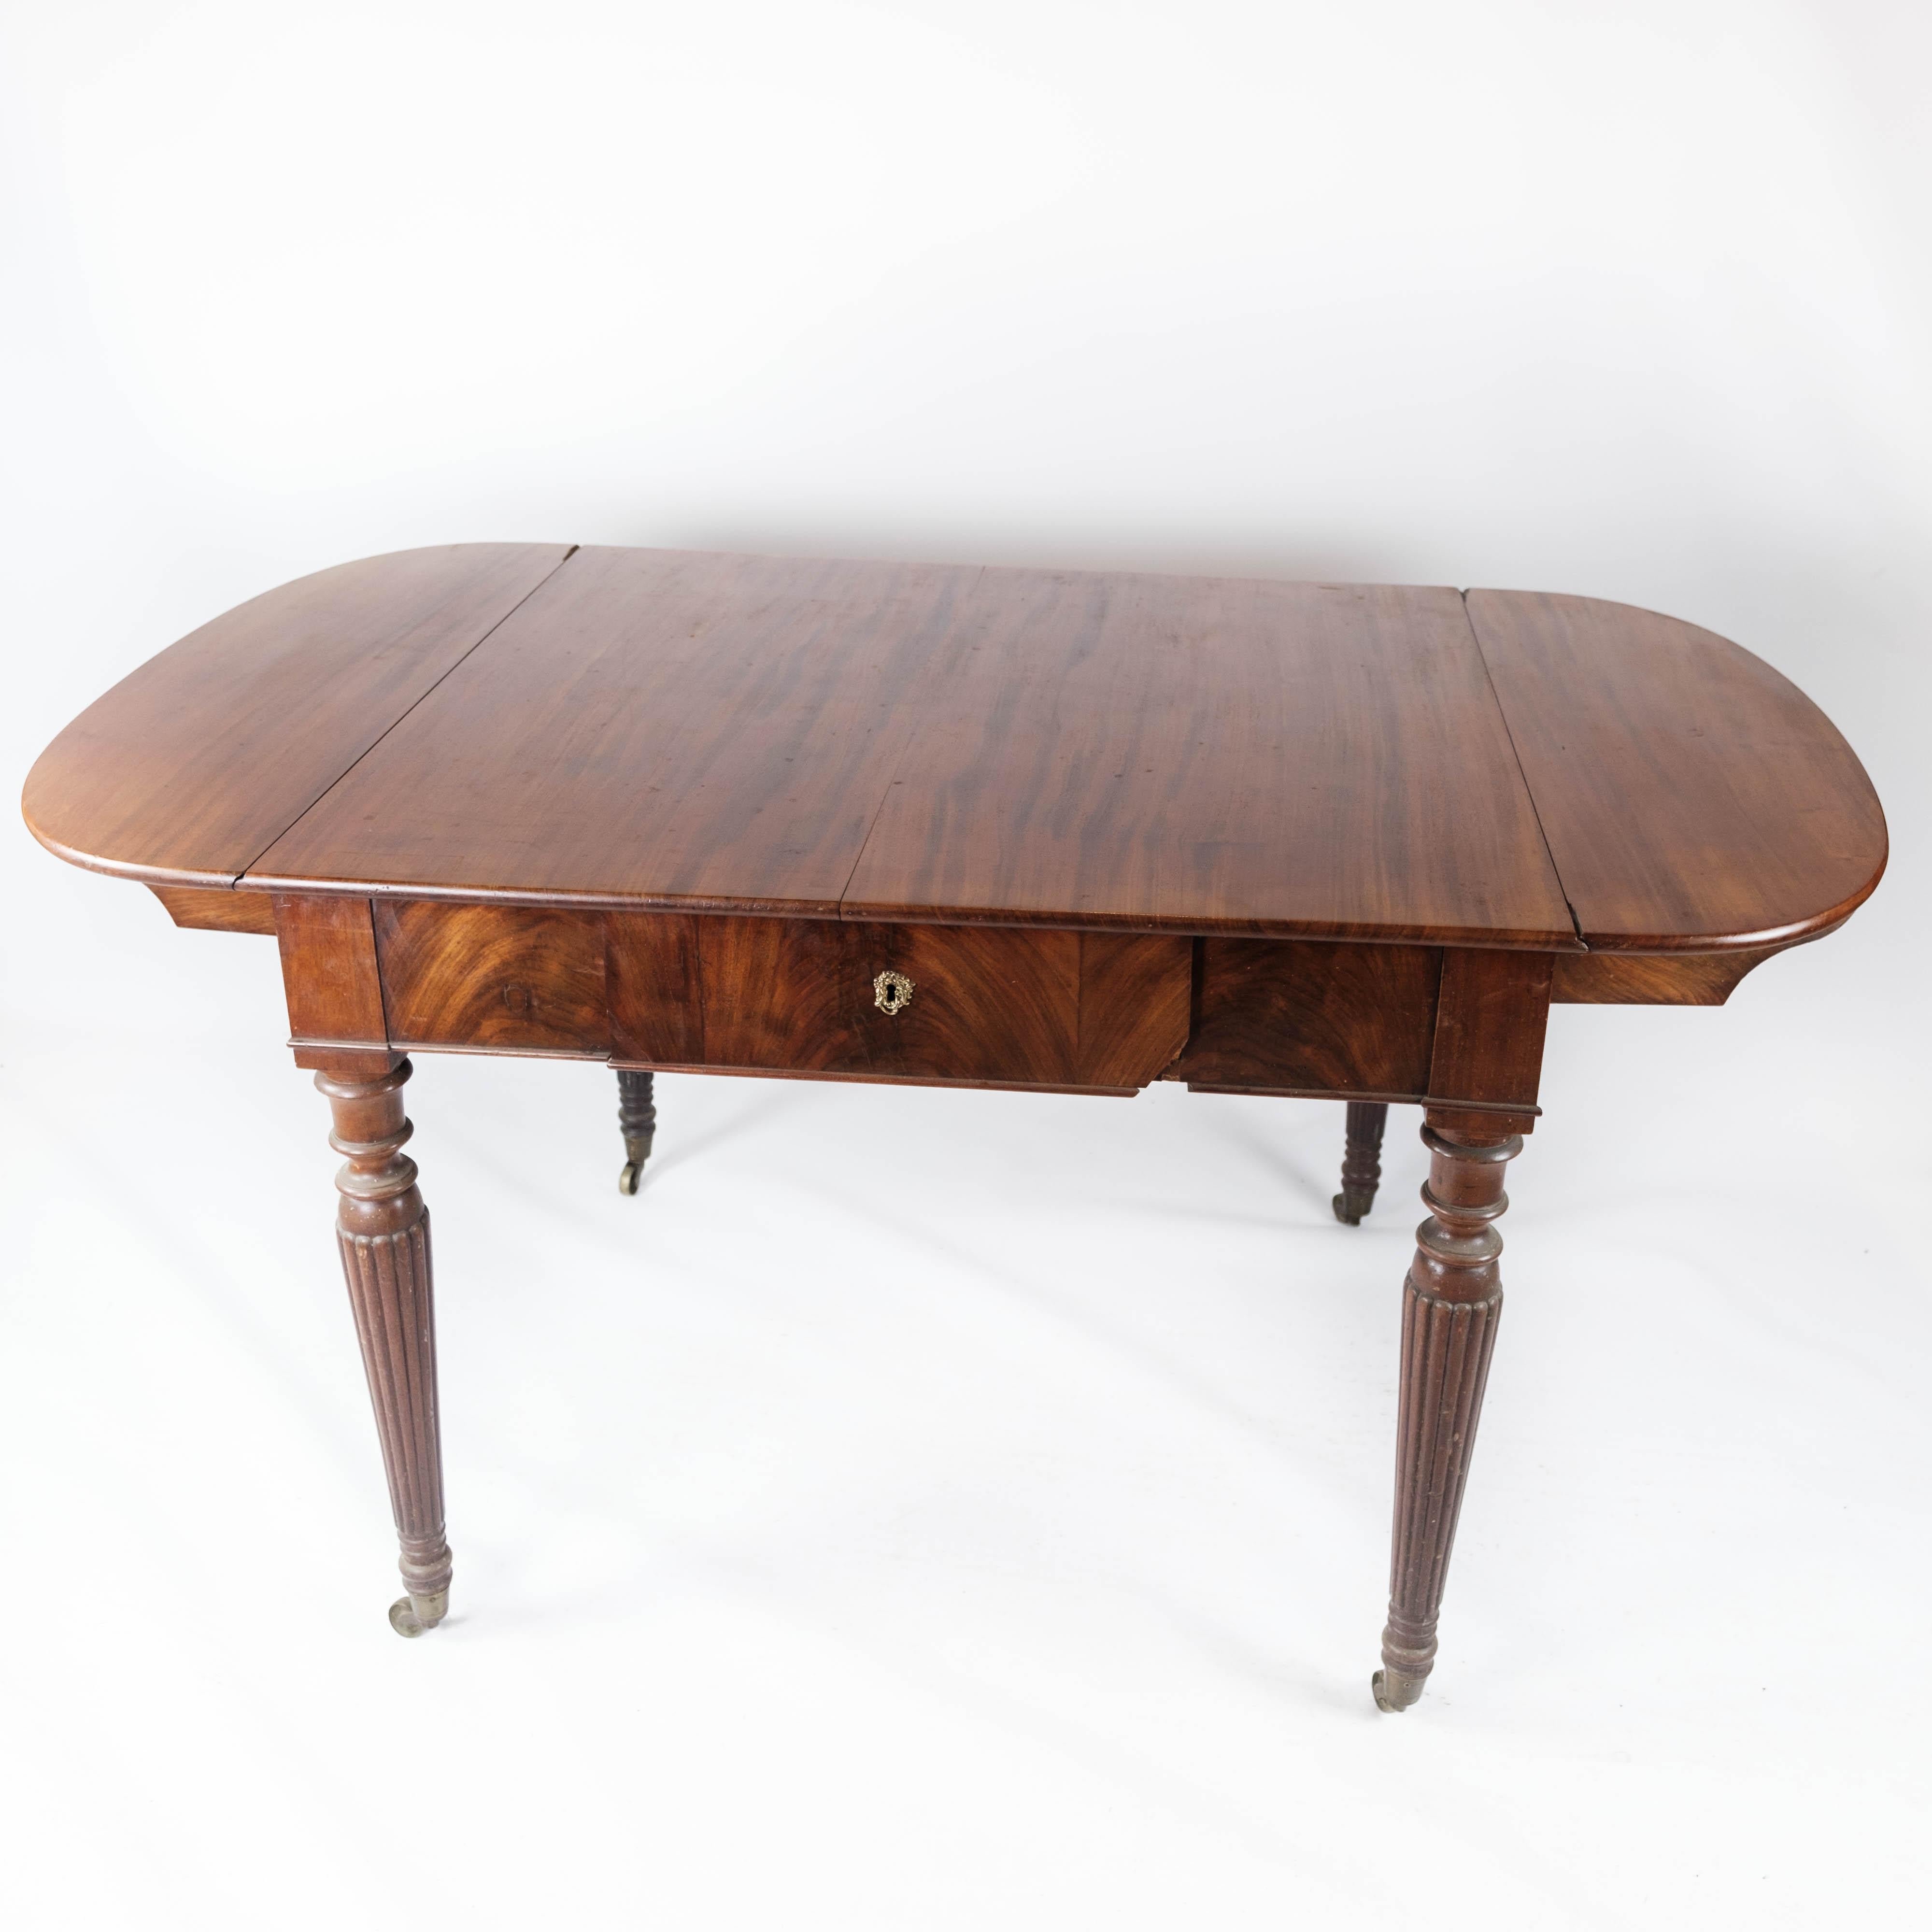 Dining Table of Mahogany with Extension Plates, 1840s For Sale 3